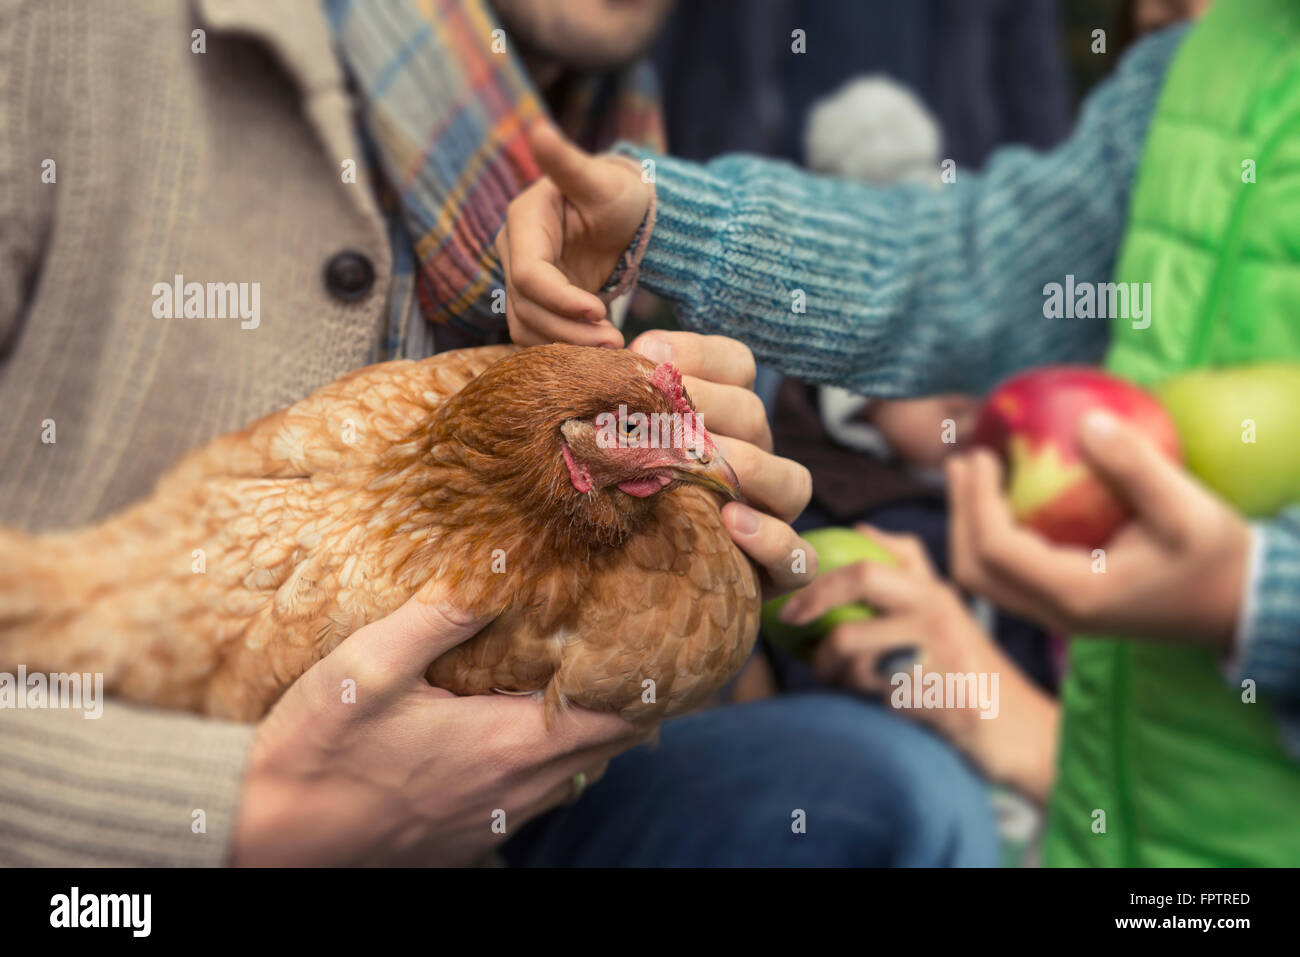 Father and son stroking chicken bird, Bavaria, Germany Stock Photo